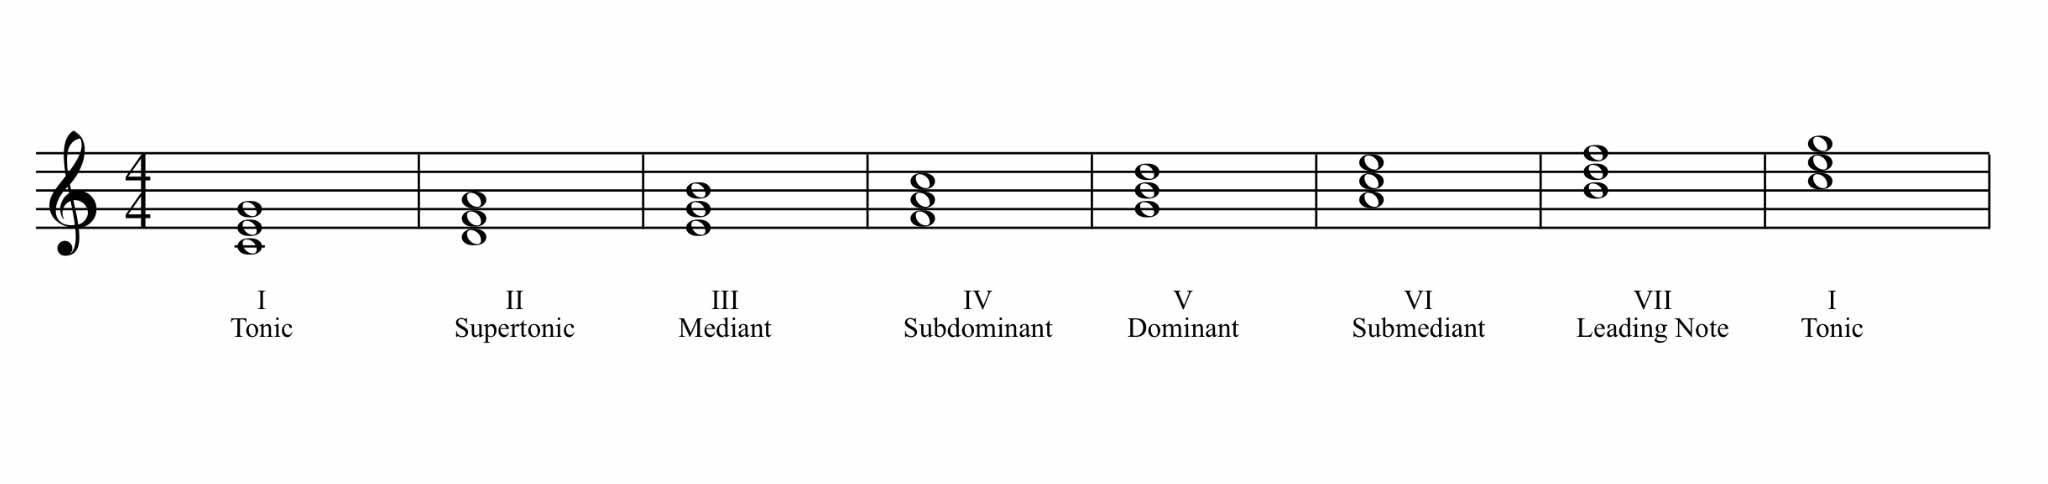 Chords in the key of C major.